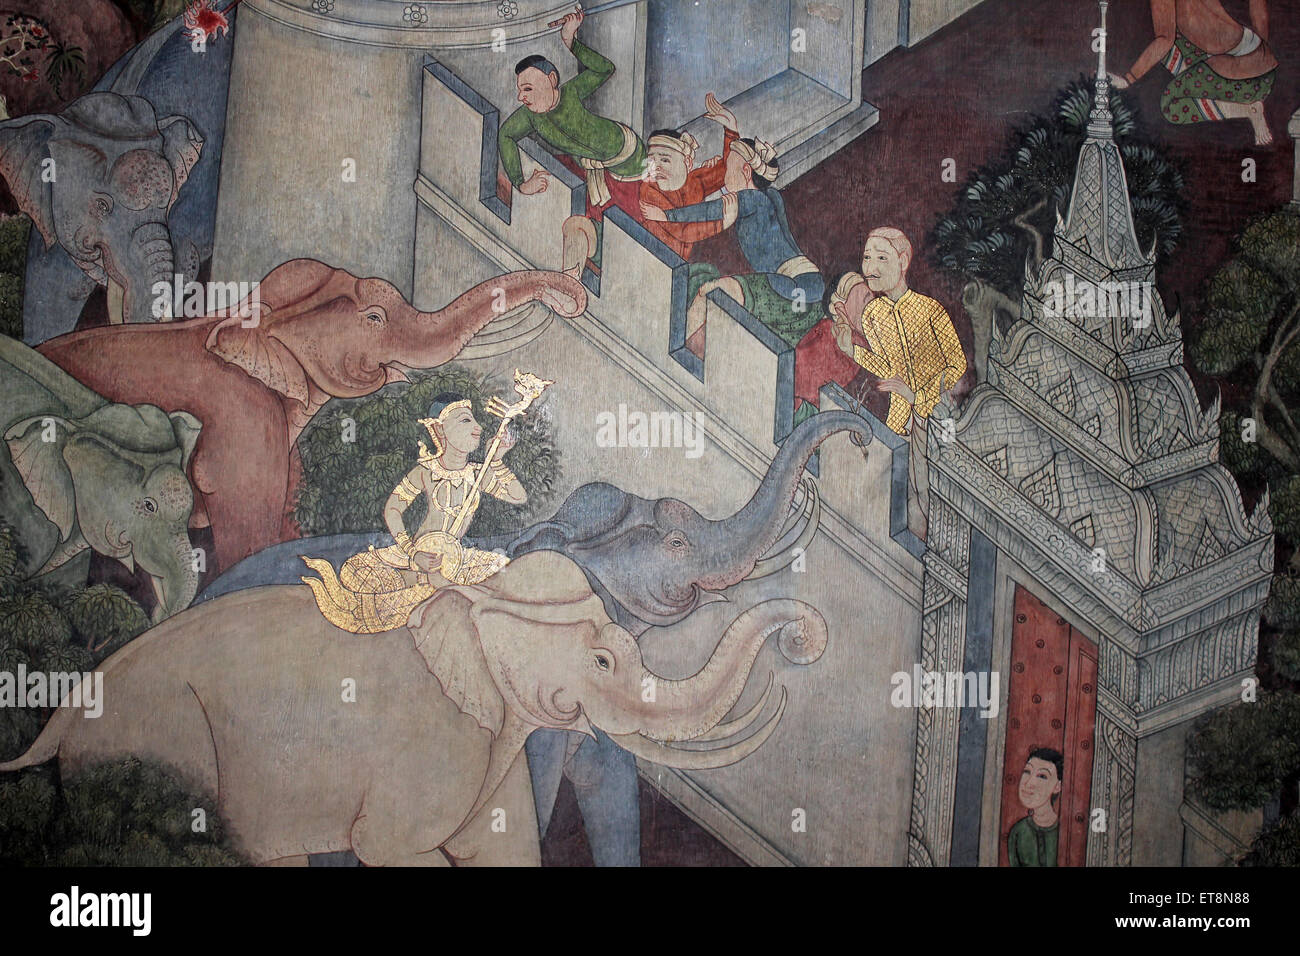 Mural In Wat Pho Temple, Thailand Stock Photo